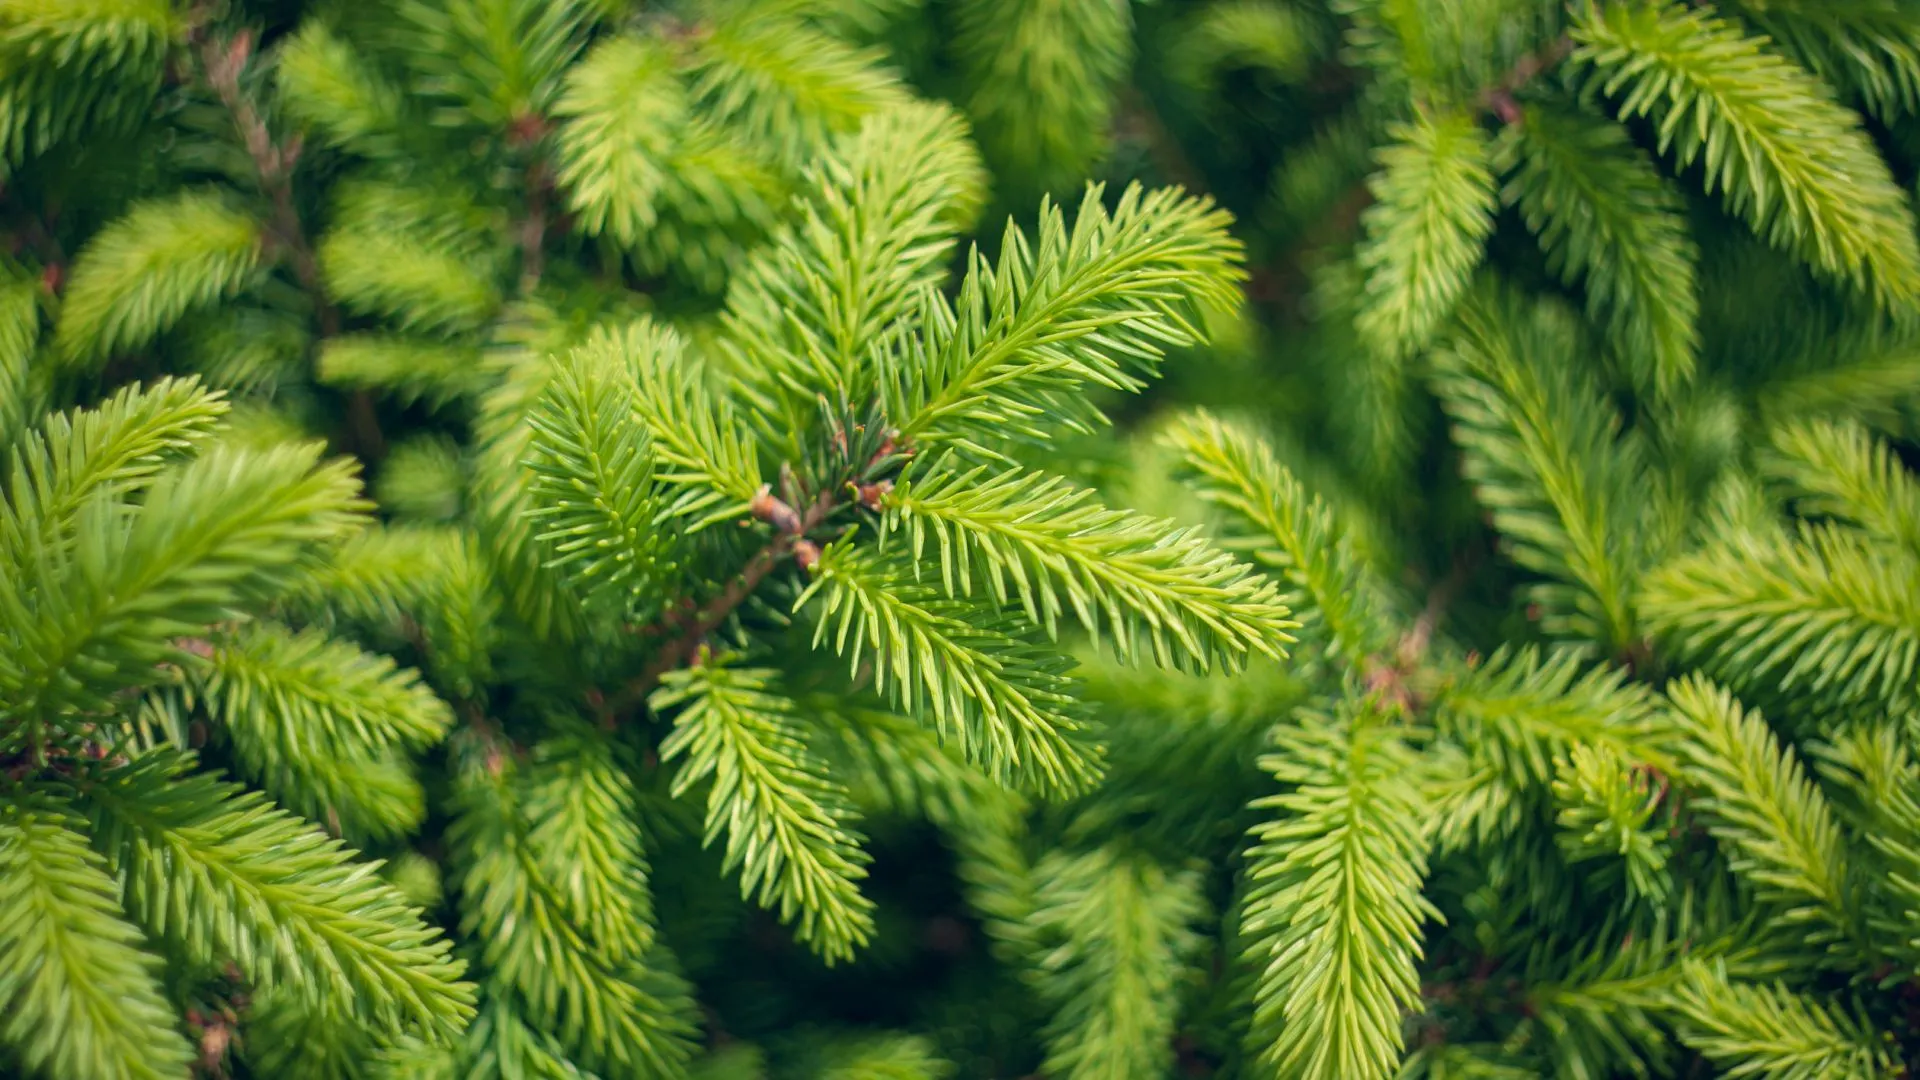 Is Your Spruce Tree Suffering From Needle Cast Disease?